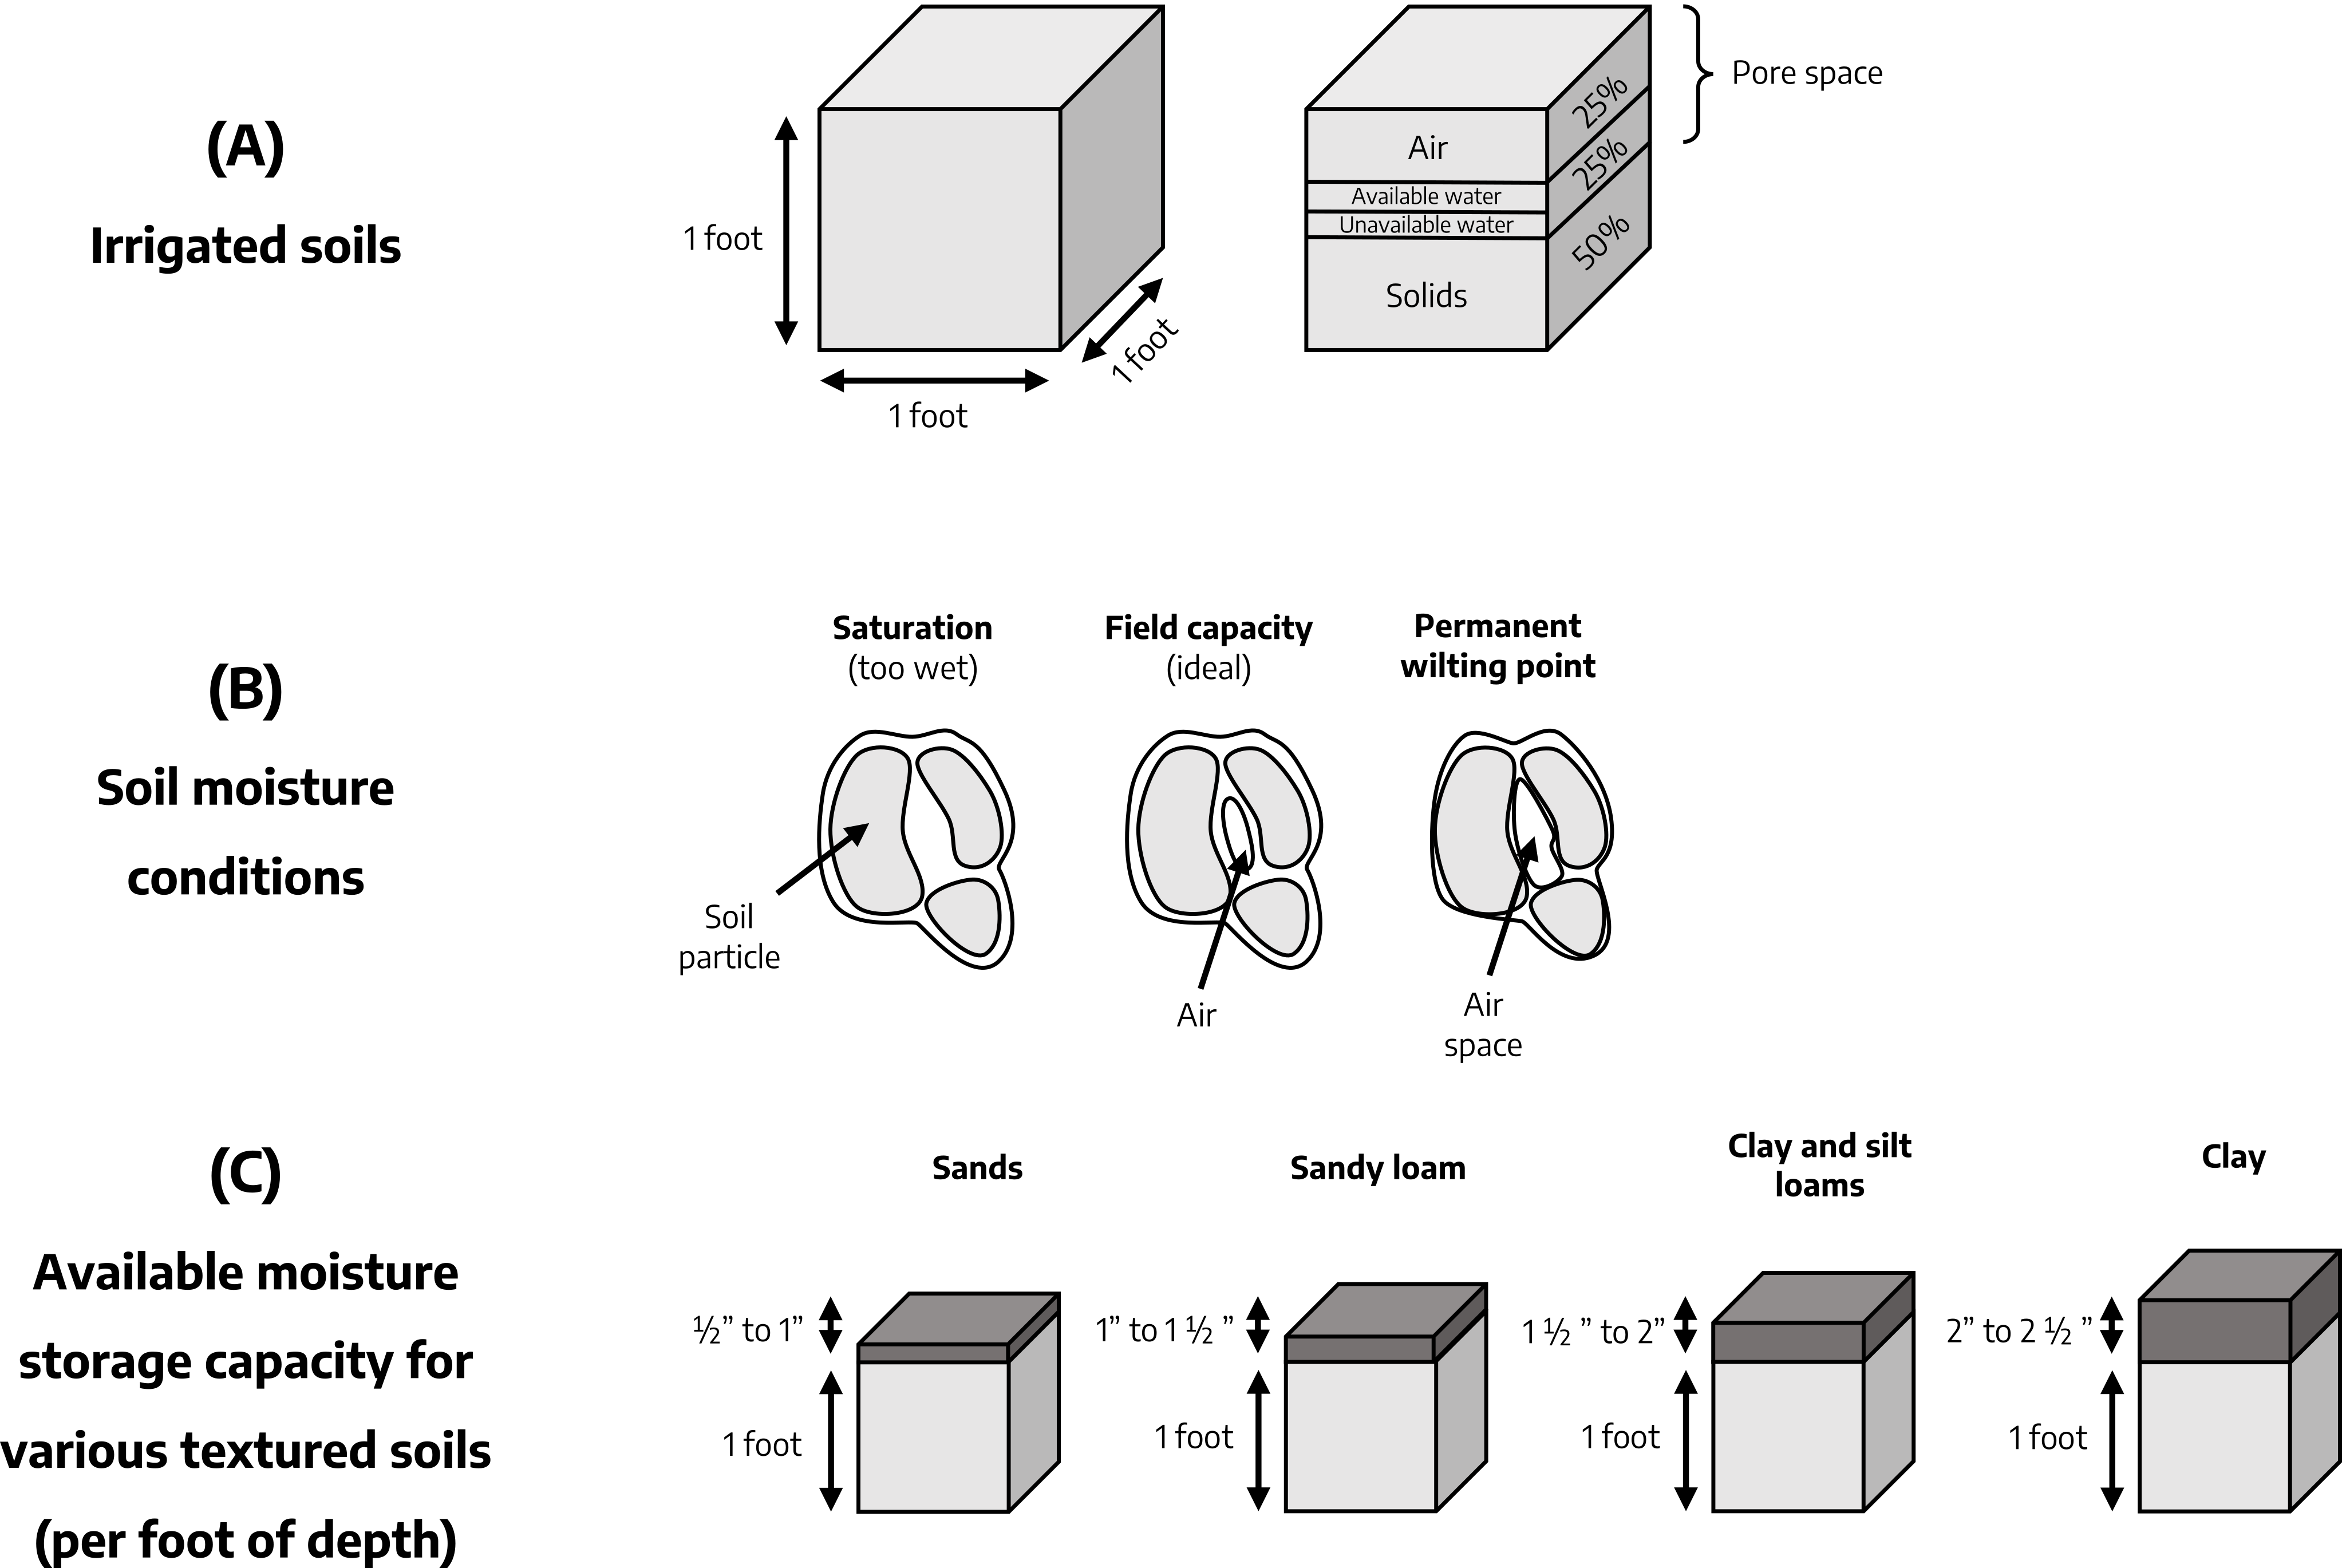 Three Diagrams labeled A, B, and C. Diagram A, Irrigated Soils, shows two cubes approximately one foot in length, width, and height. The second cube has sections of varying sizes to show percentages of soil composition. The layers from top to bottom are Air, 25%, Available Water and Unavailable Water, 25%, and Solids, 50%. Air, Available and Unavailable water are categorized as Pore Space. Diagram B, Soil Mositure Conditions, shows three ? Diagram C, Available Moisuter storage capacity for various textured soils (per foot of depth), shows four cubes approximately one foot in length, width, and height. The first cube is marked as Sands with a section of approximatley 1/2 to 1 inch of area marked as available mositure storage. The second cube is marked as Sandy Loam, with a section of approximatley 1 to 1 1/2 inch(es) of area marked as available mositure storage. The third cube is marked as Clay and Silt Loams with approximately 1 1/2 to 2 inches of area marked as available mositure storage. The fourth cube is marked as Clay with an area approximatley 2 to 2 1/2 inches marked as available moisture storage.